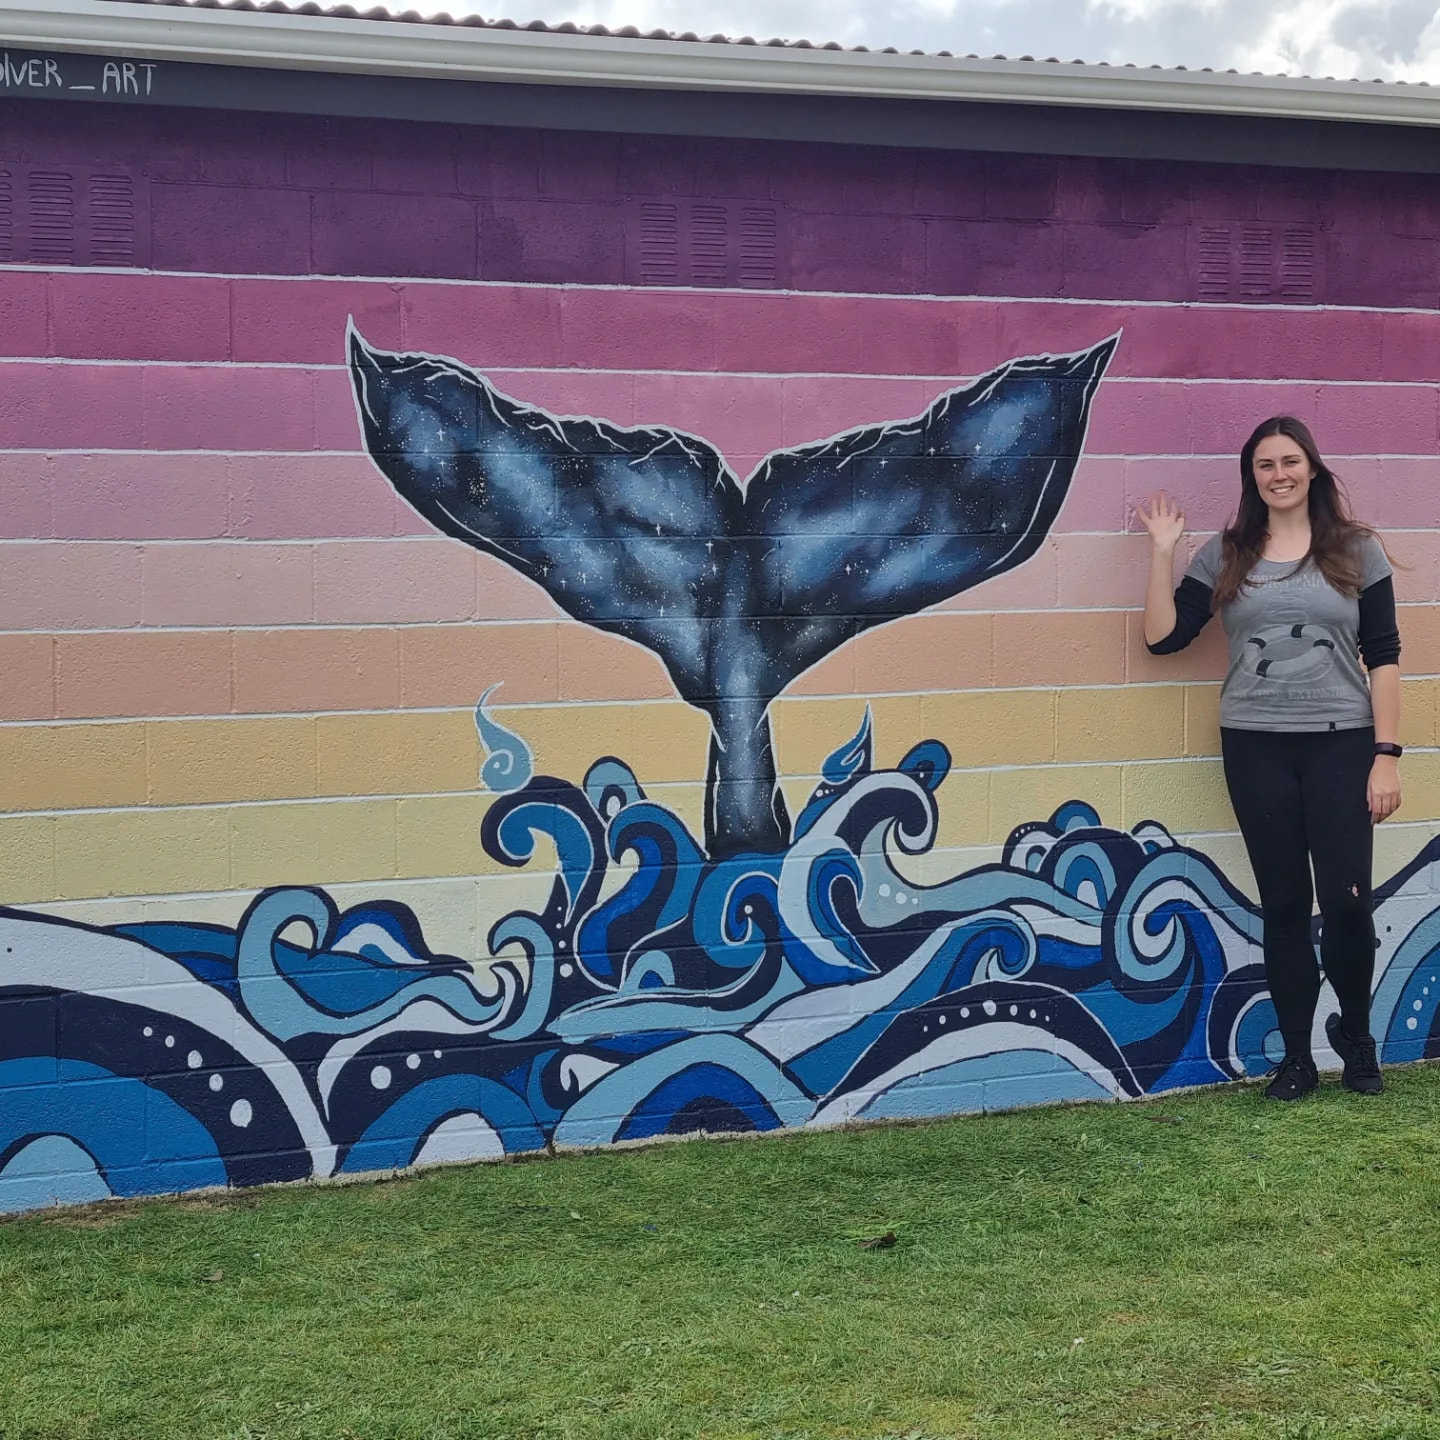 A woman in front of a mural featuring the tail of a whale in waves.